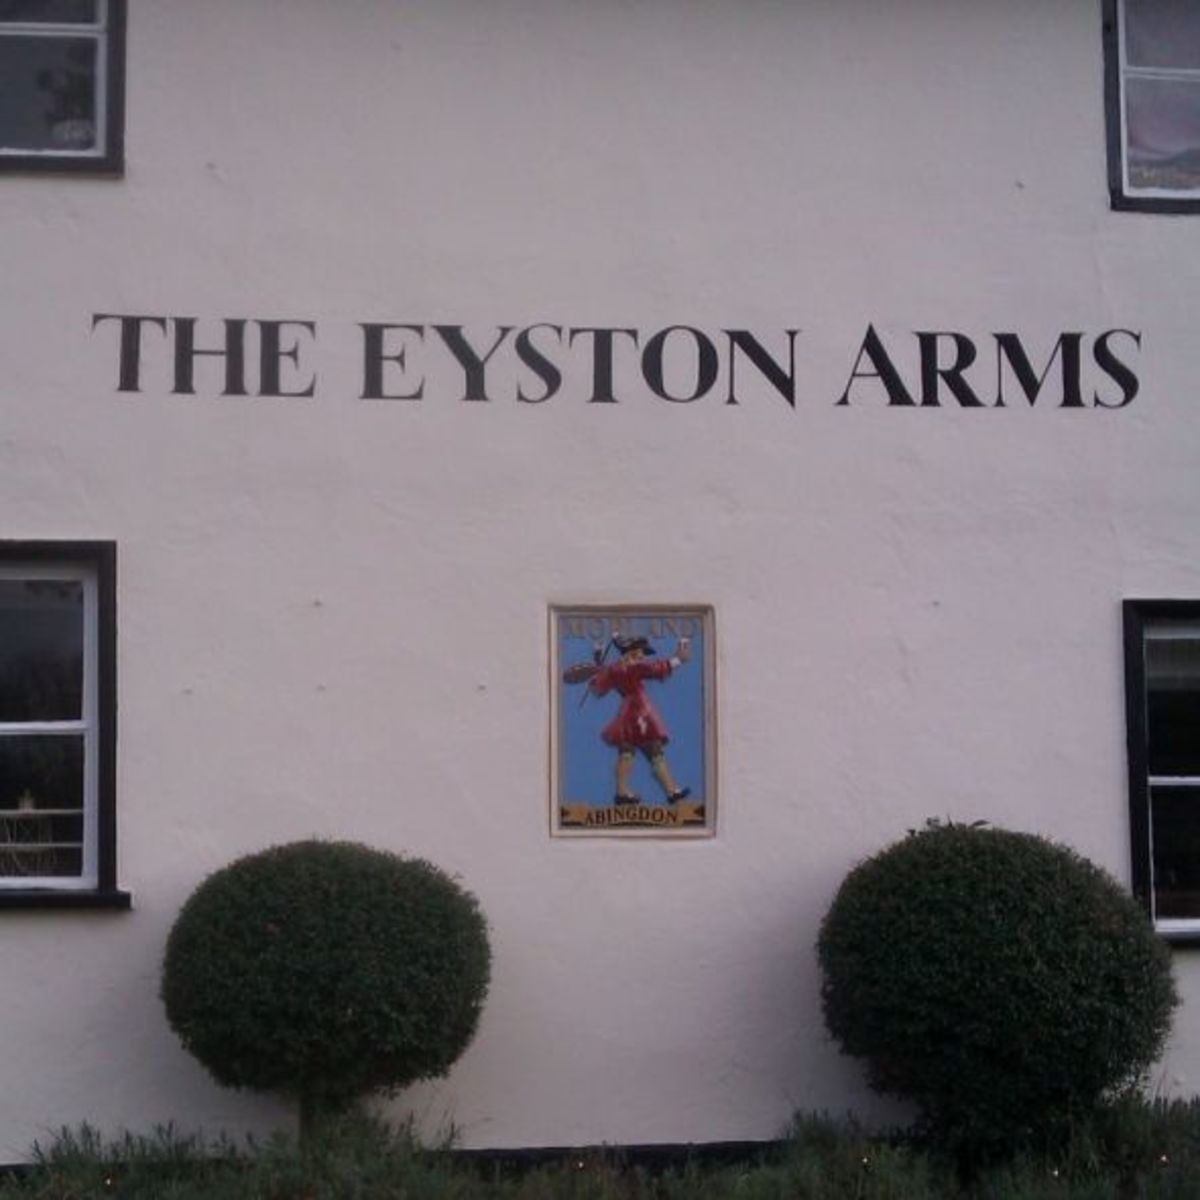 Eyston Arms East Hendred